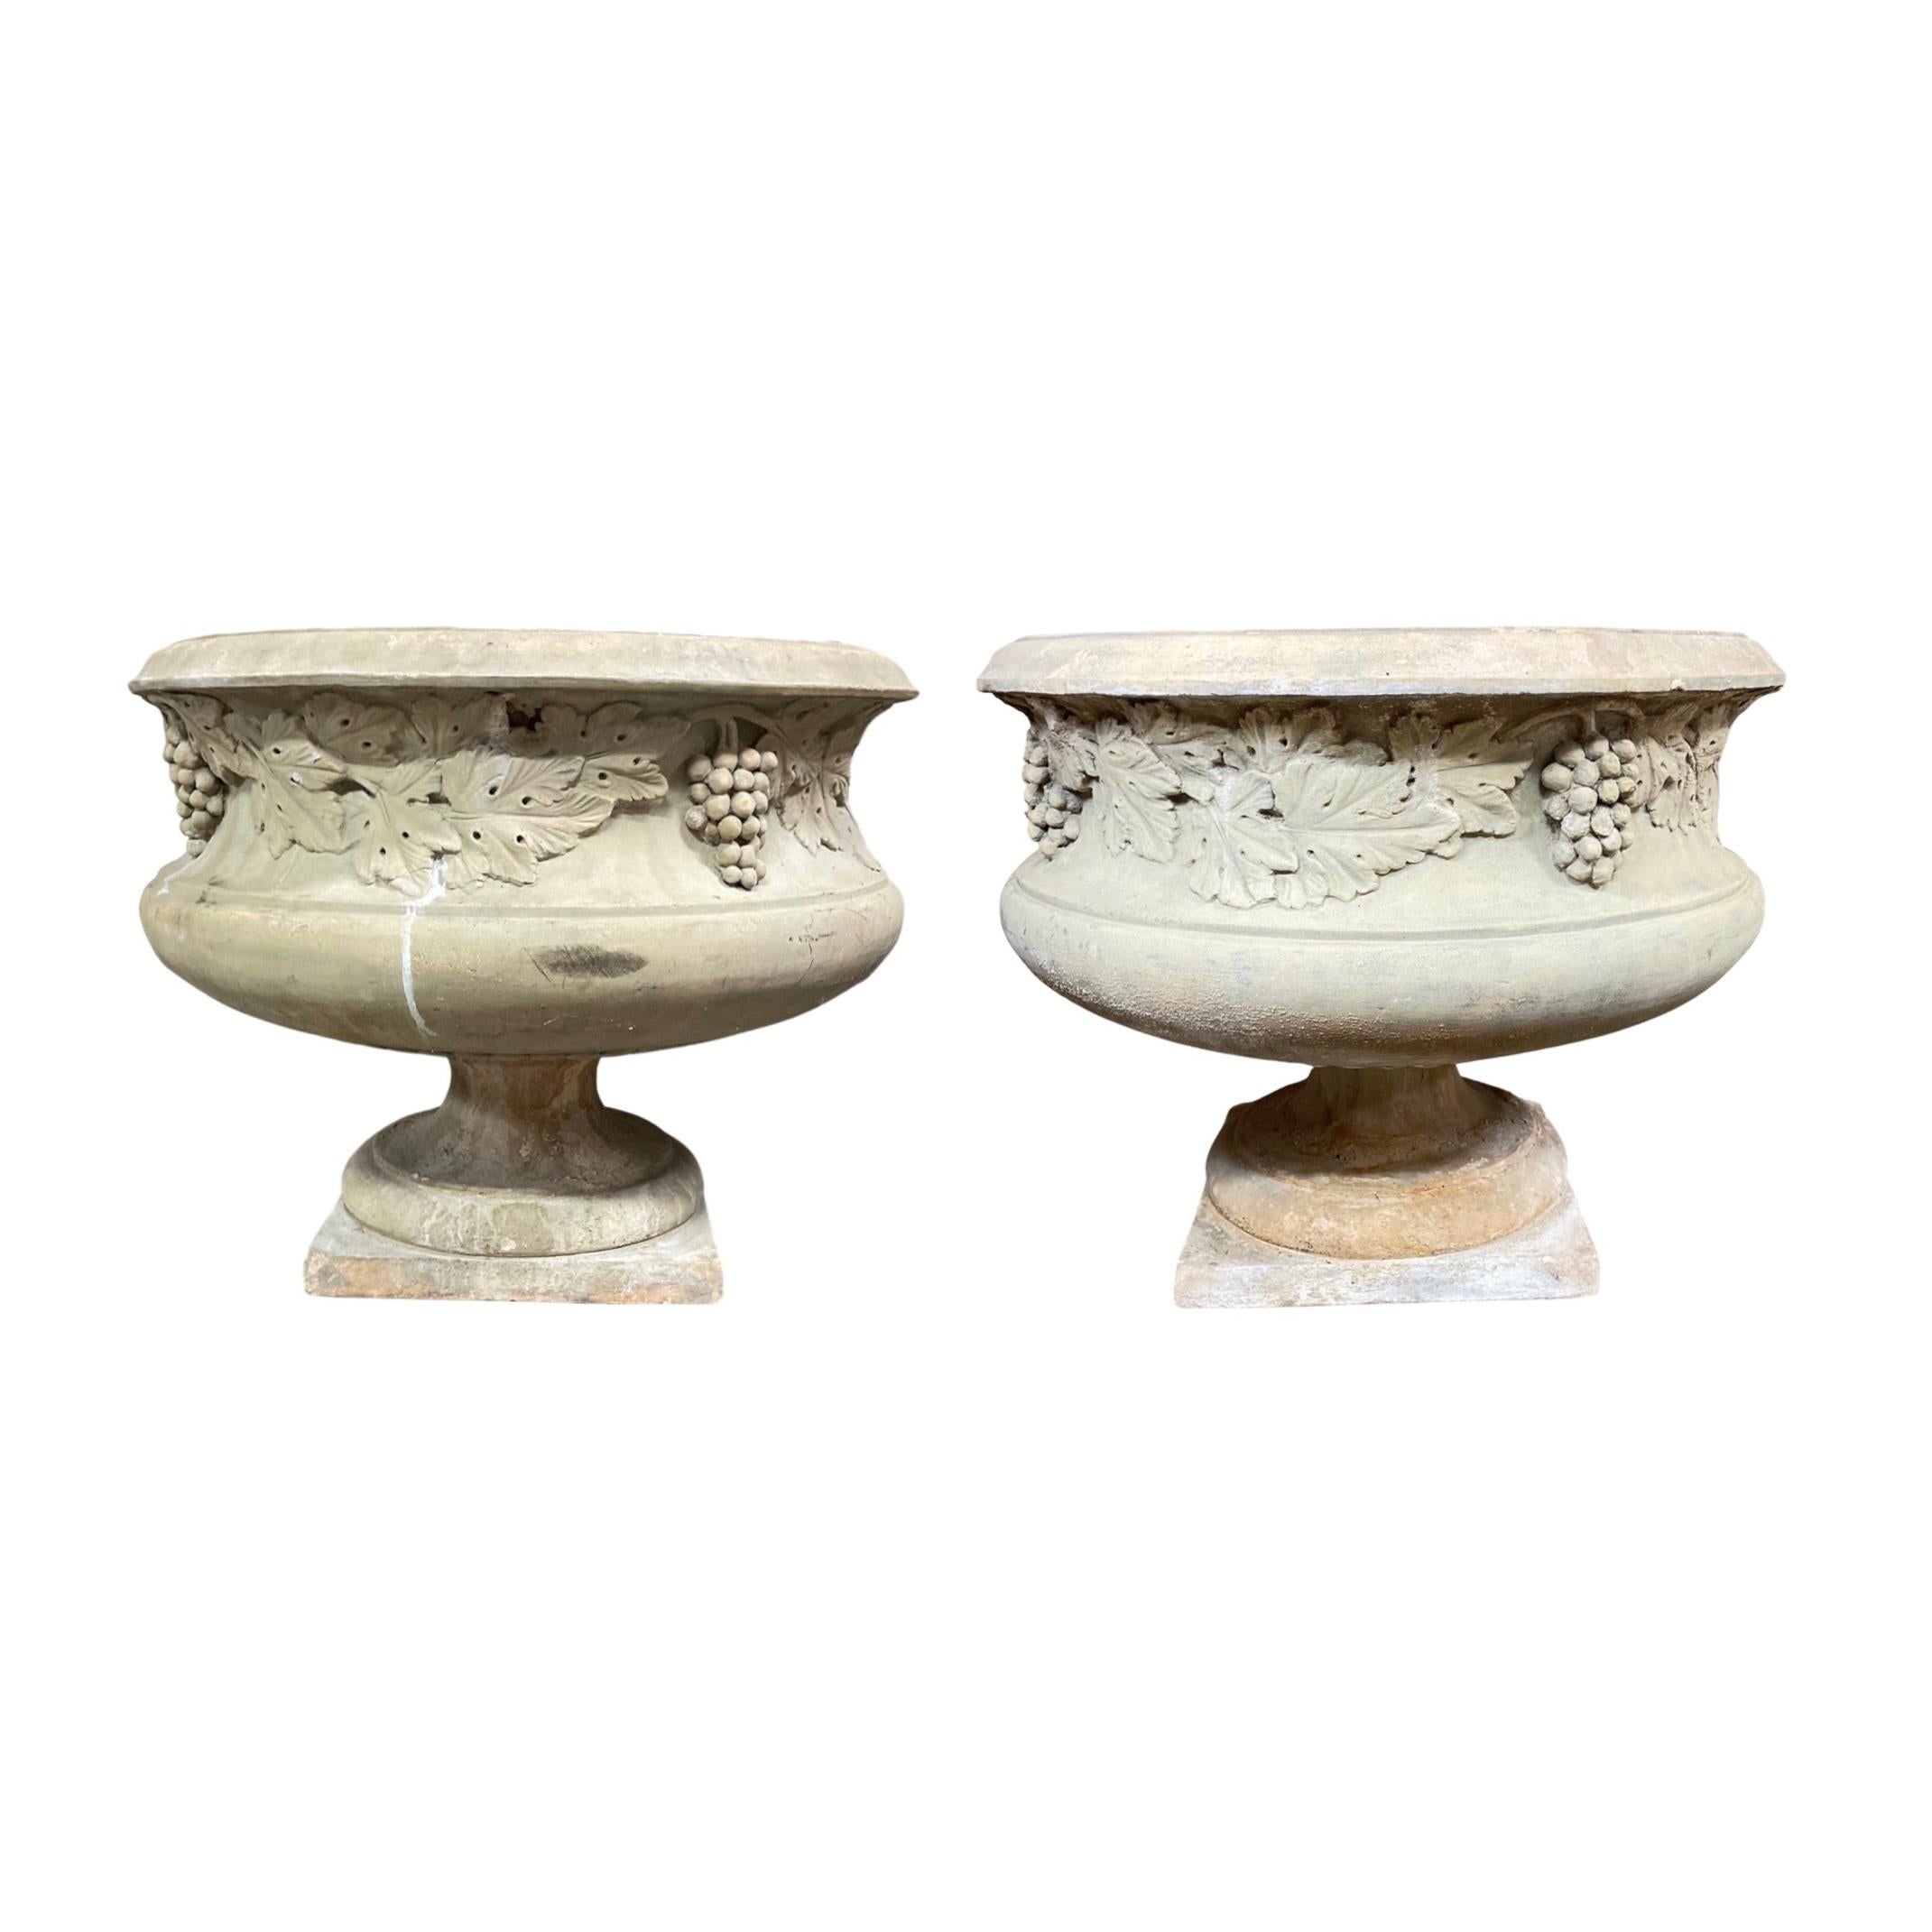 These English Low Line Terracotta Planters make a perfect accent piece for your home. Handmade in England in the 1850s, they are made of durable terracotta and feature intricate carvings of grapes and florals. Add a touch of classic charm to your